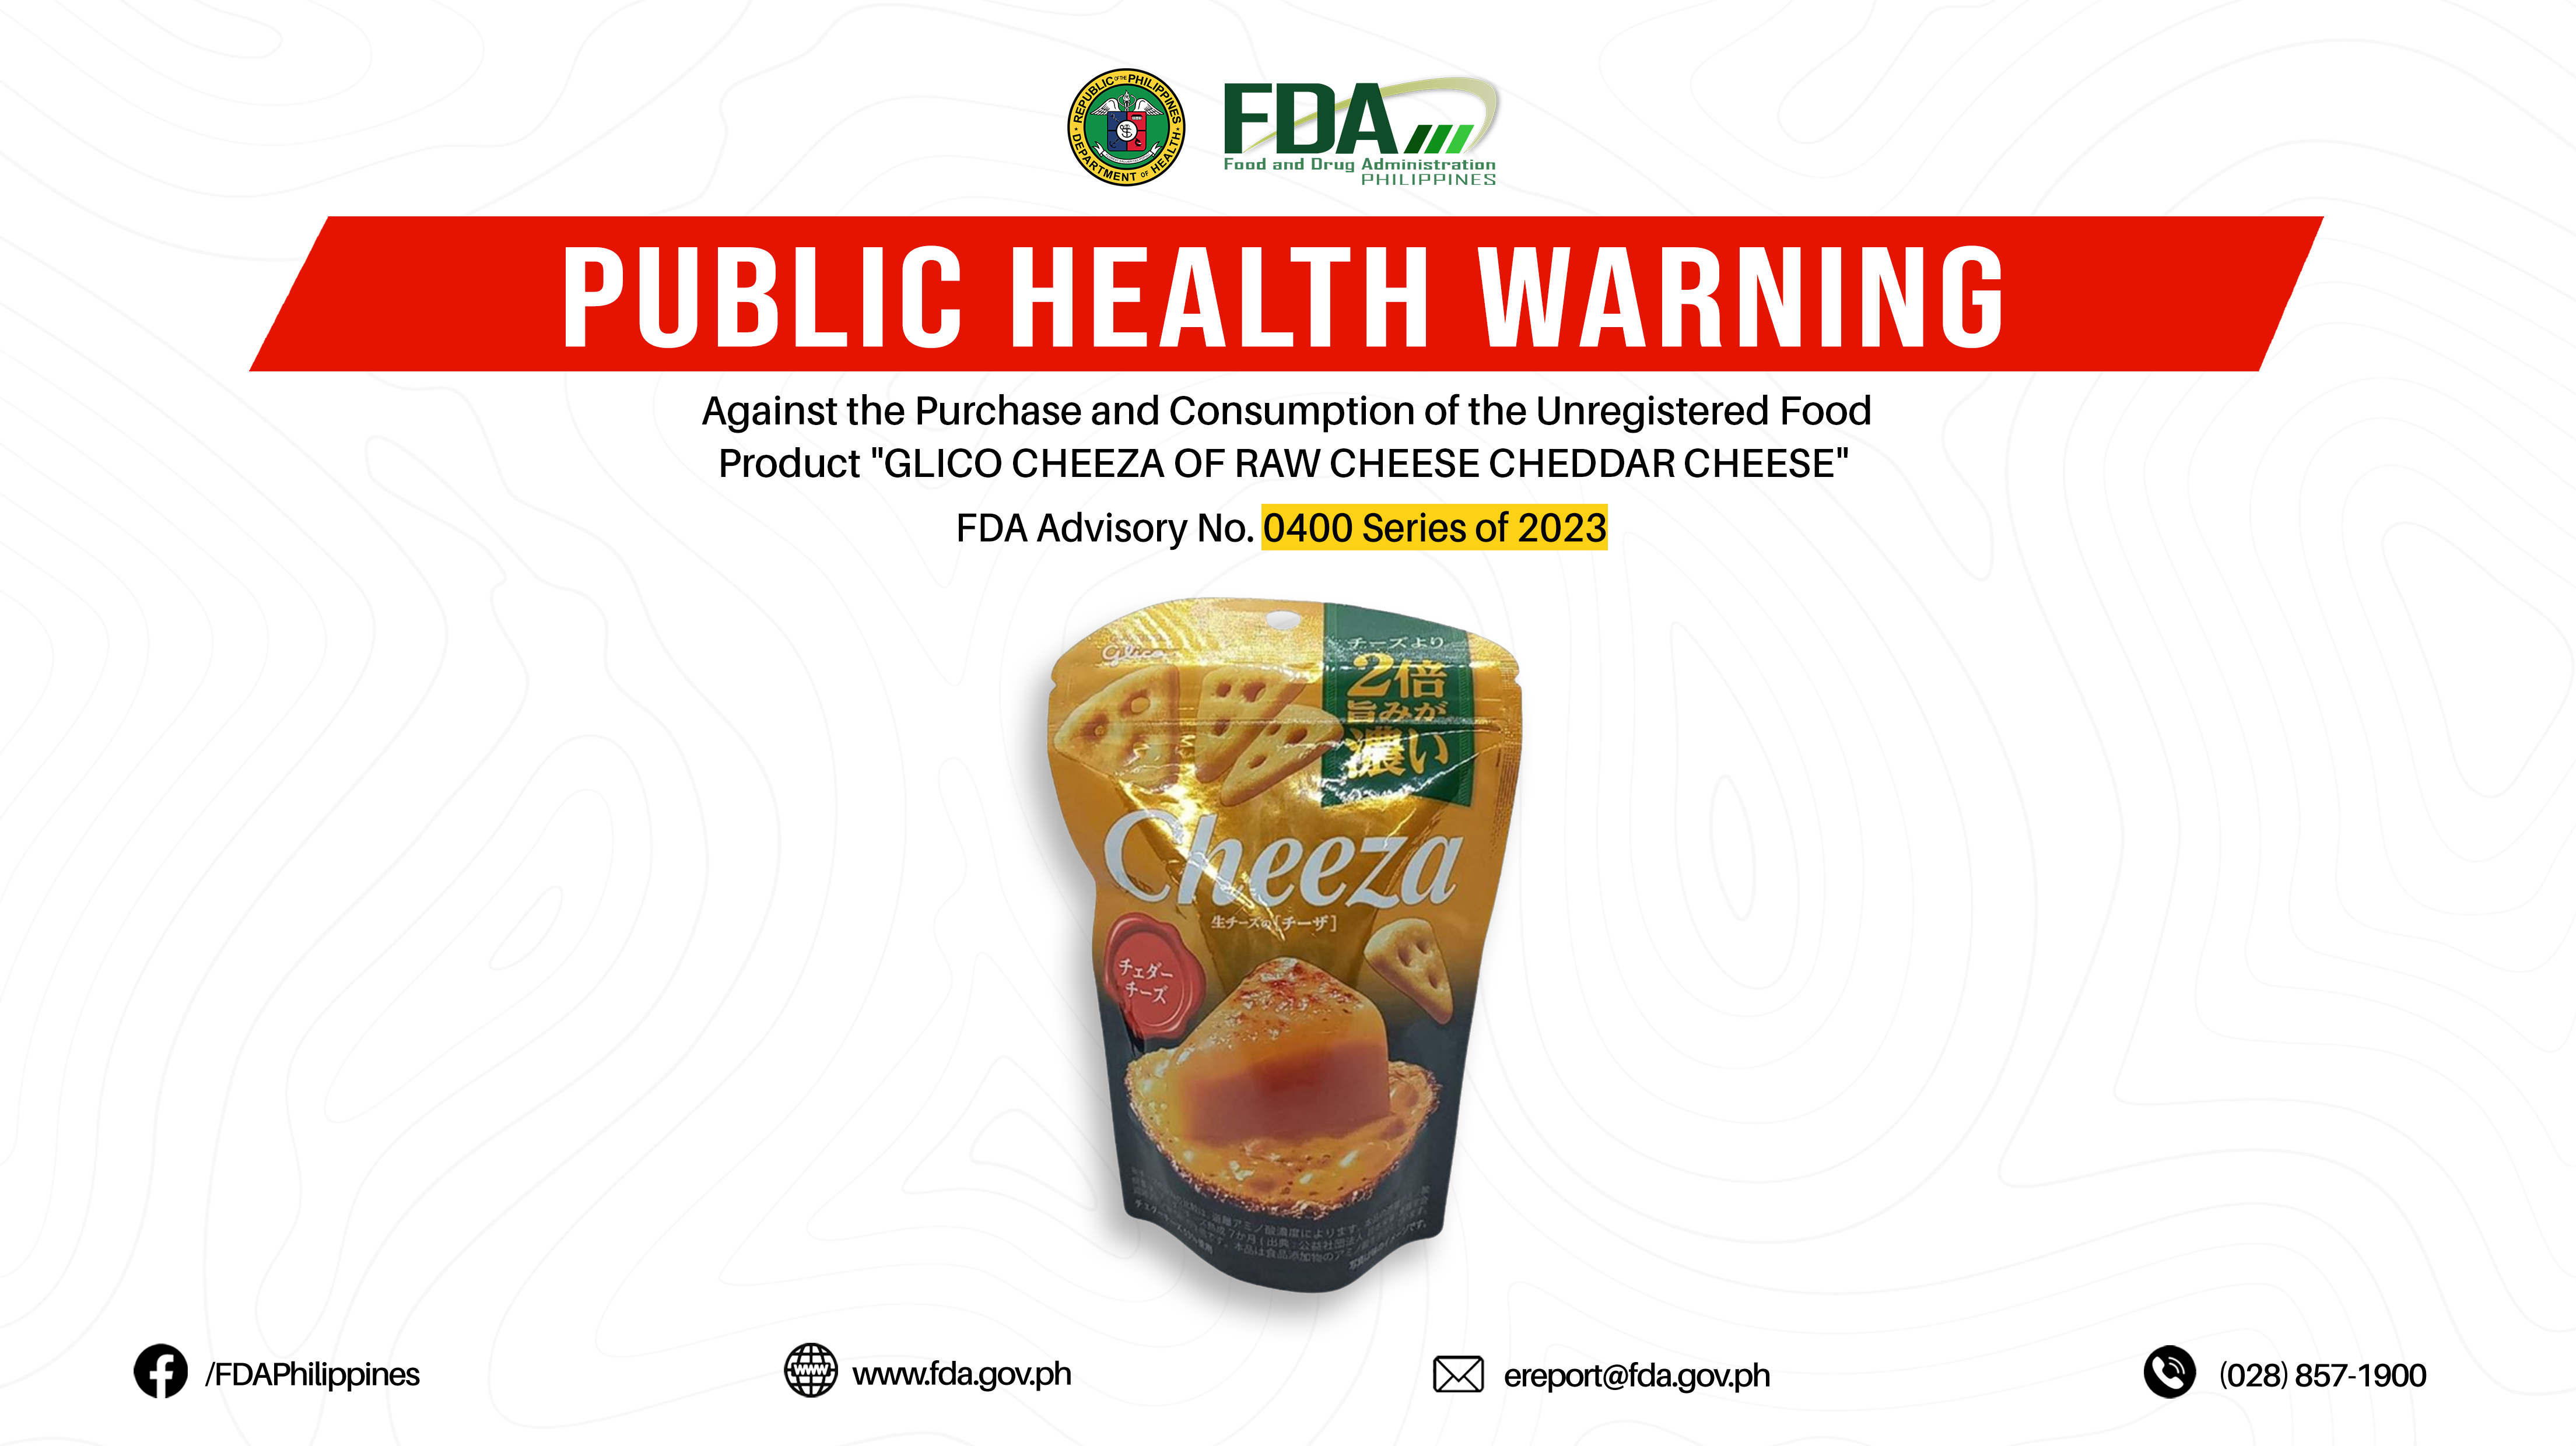 FDA Advisory No.2023-0400 || Public Health Warning Against the Purchase and Consumption of the Unregistered Food Product “GLICO CHEEZA OF RAW CHEESE CHEDDAR CHEESE”